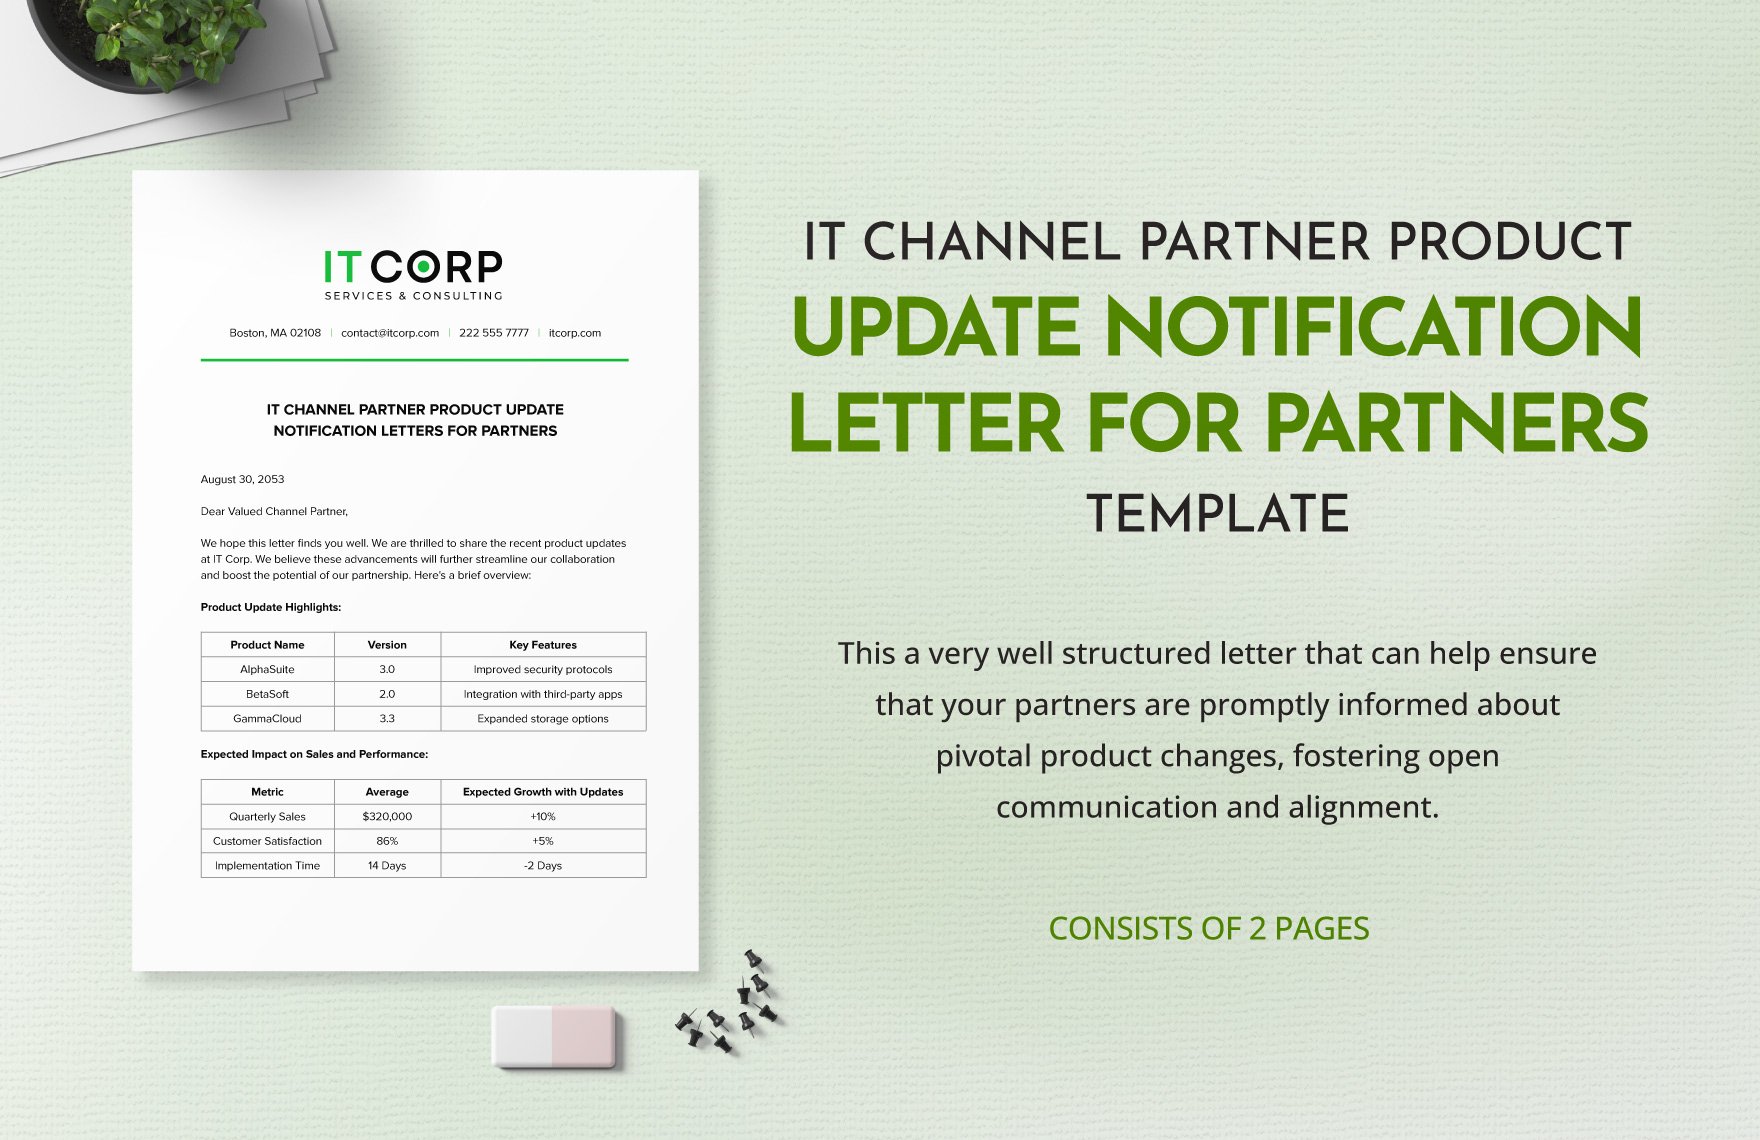 IT Channel Partner Product Update Notification Letter for Partners Template